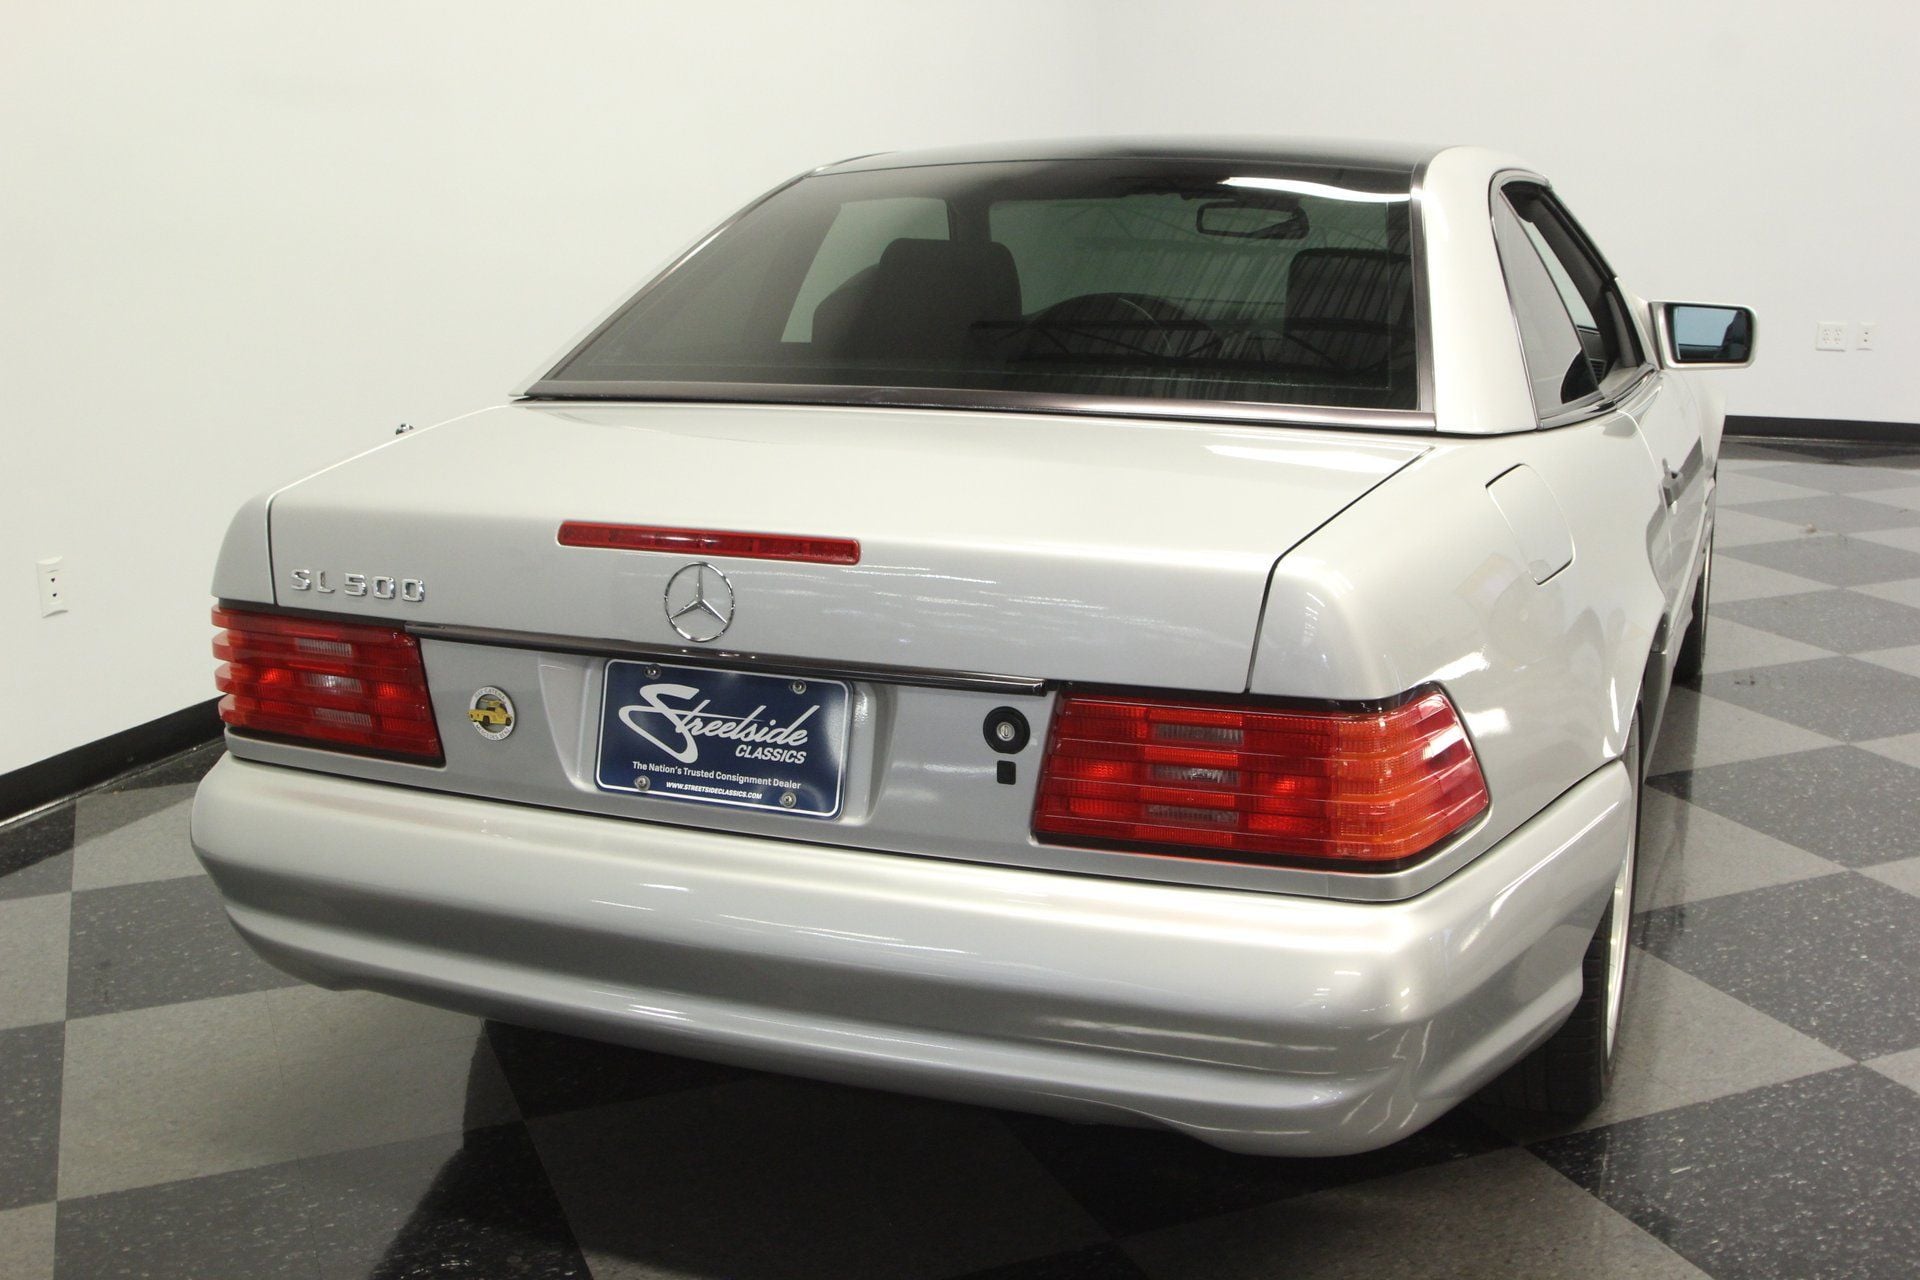 1997 Mercedes-Benz SL500 - 97 SL 500 sport Panorama Rood AMG monochrome’s and HID headlights - Used - VIN WDBFA67F7VF146421 - 73,200 Miles - 8 cyl - 2WD - Automatic - Convertible - Silver - West Bloomfield, MI 48323, United States